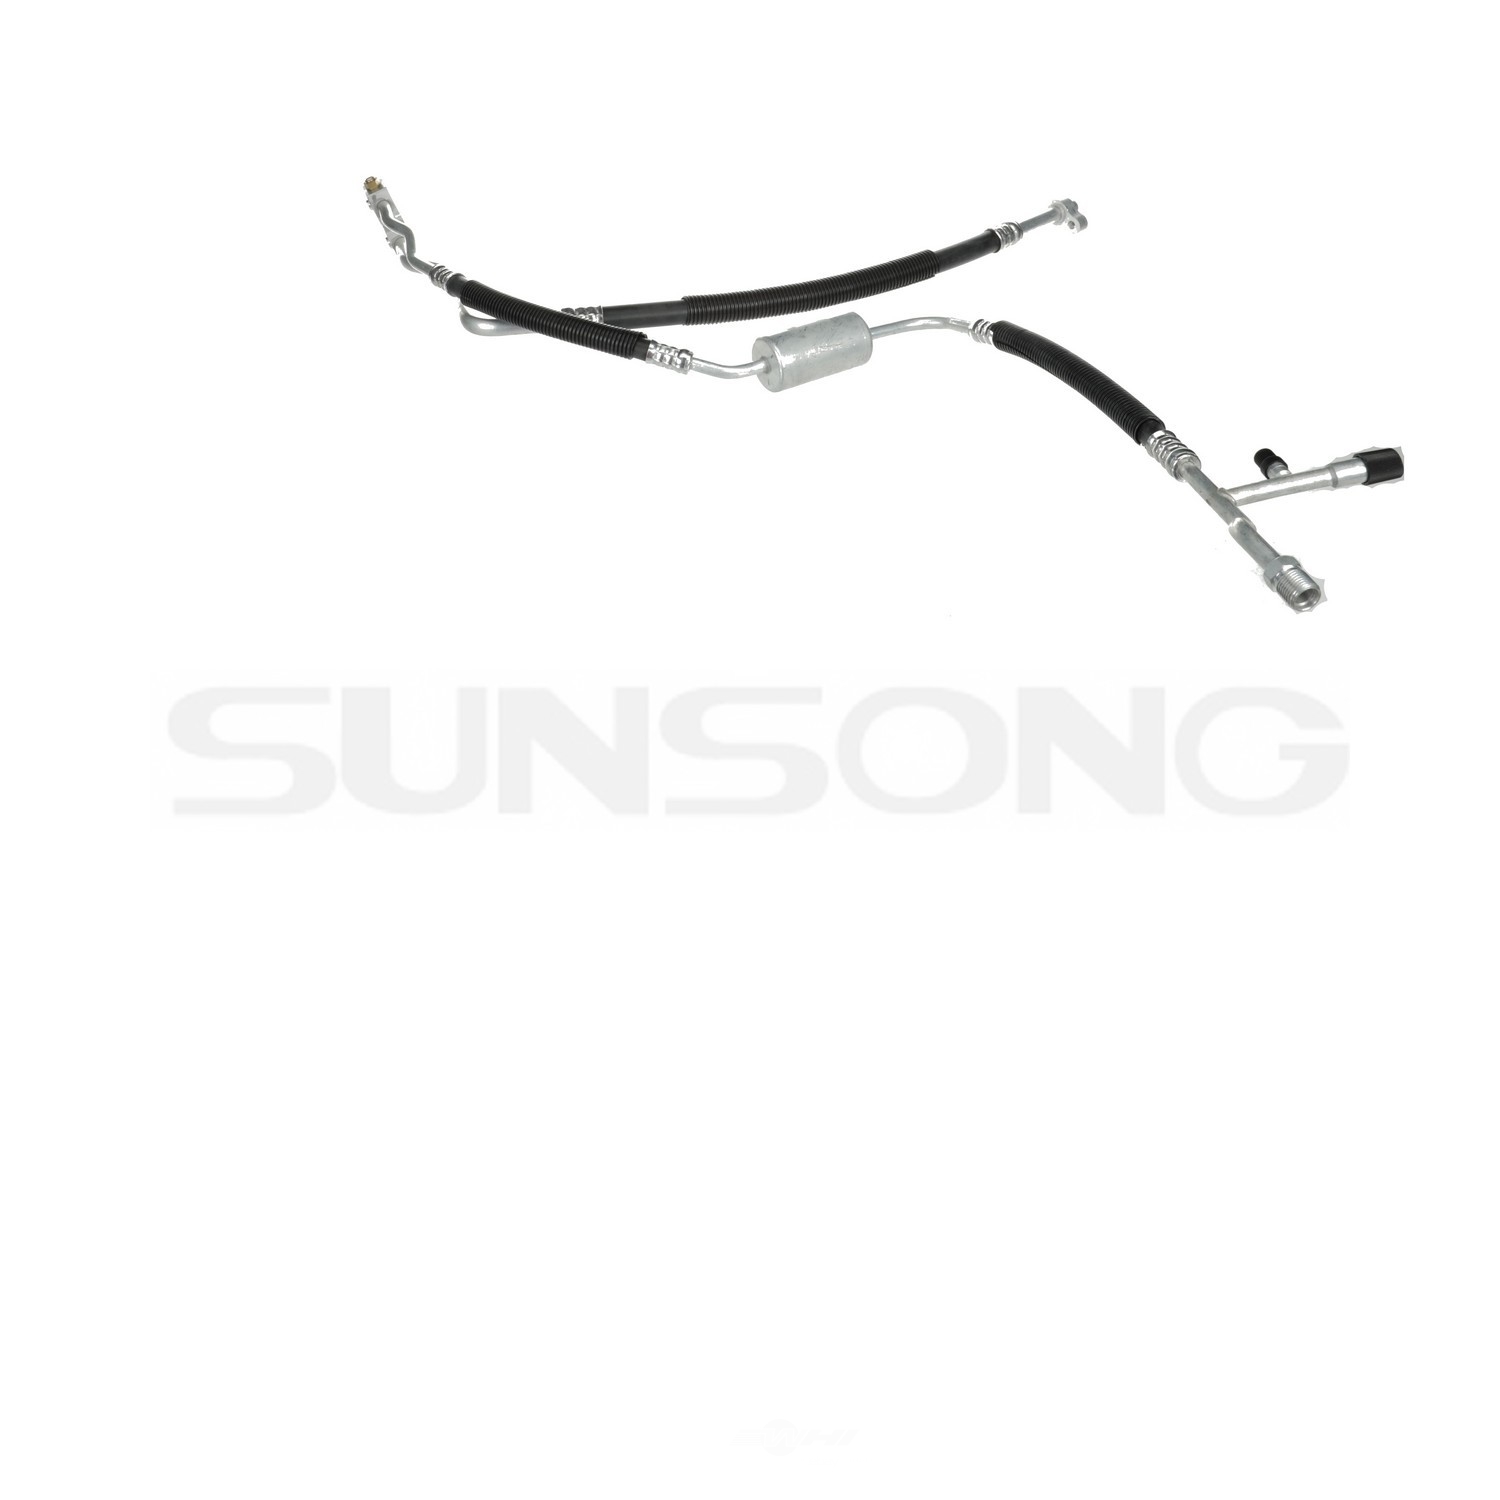 SUNSONG NORTH AMERICA - A/C Refrigerant Discharge / Suction Hose Assembly - SUG 5203011